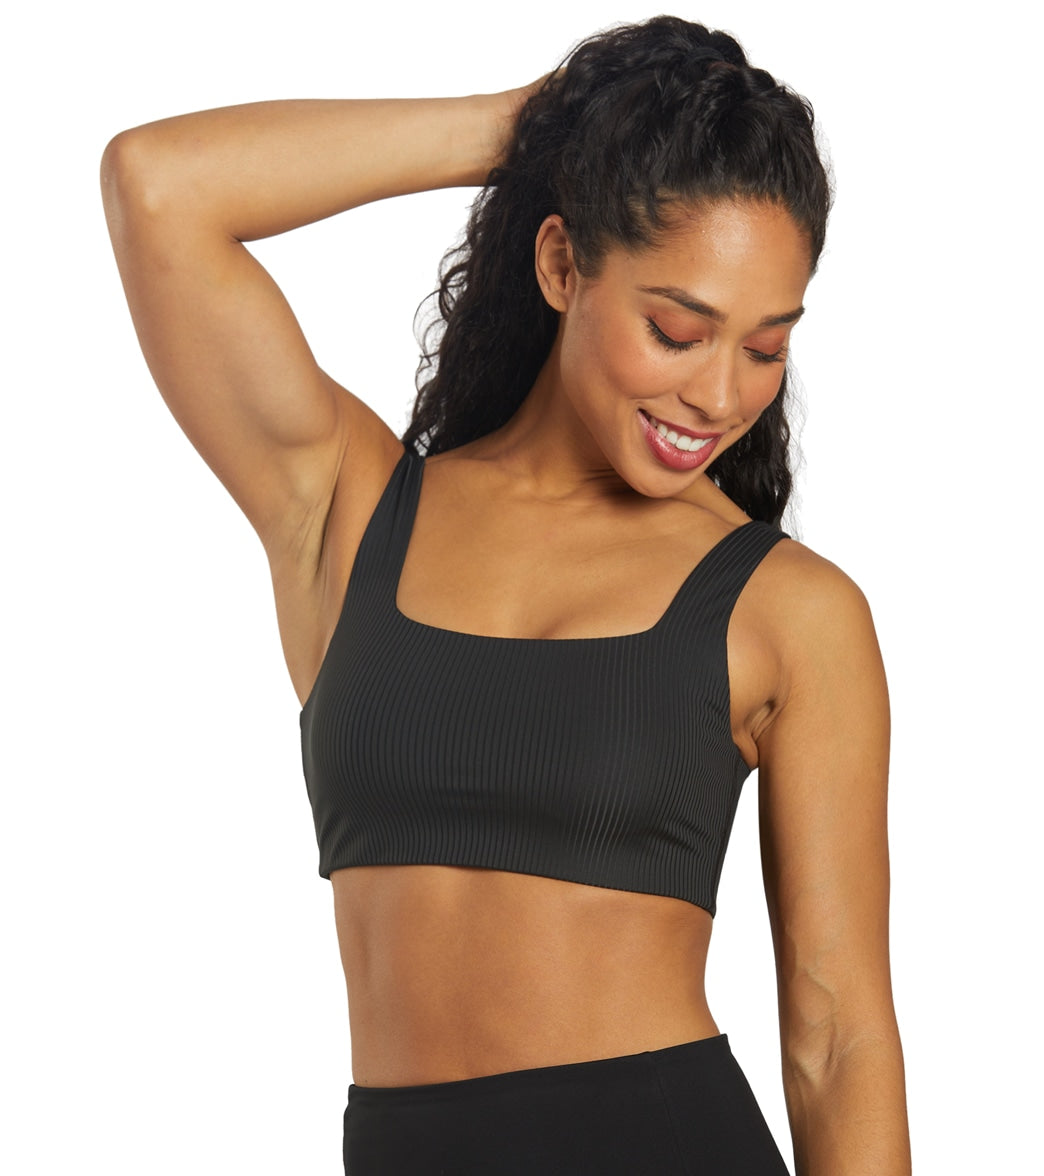 Girlfriend Collective RIB Tommy Cropped Bra - Women's